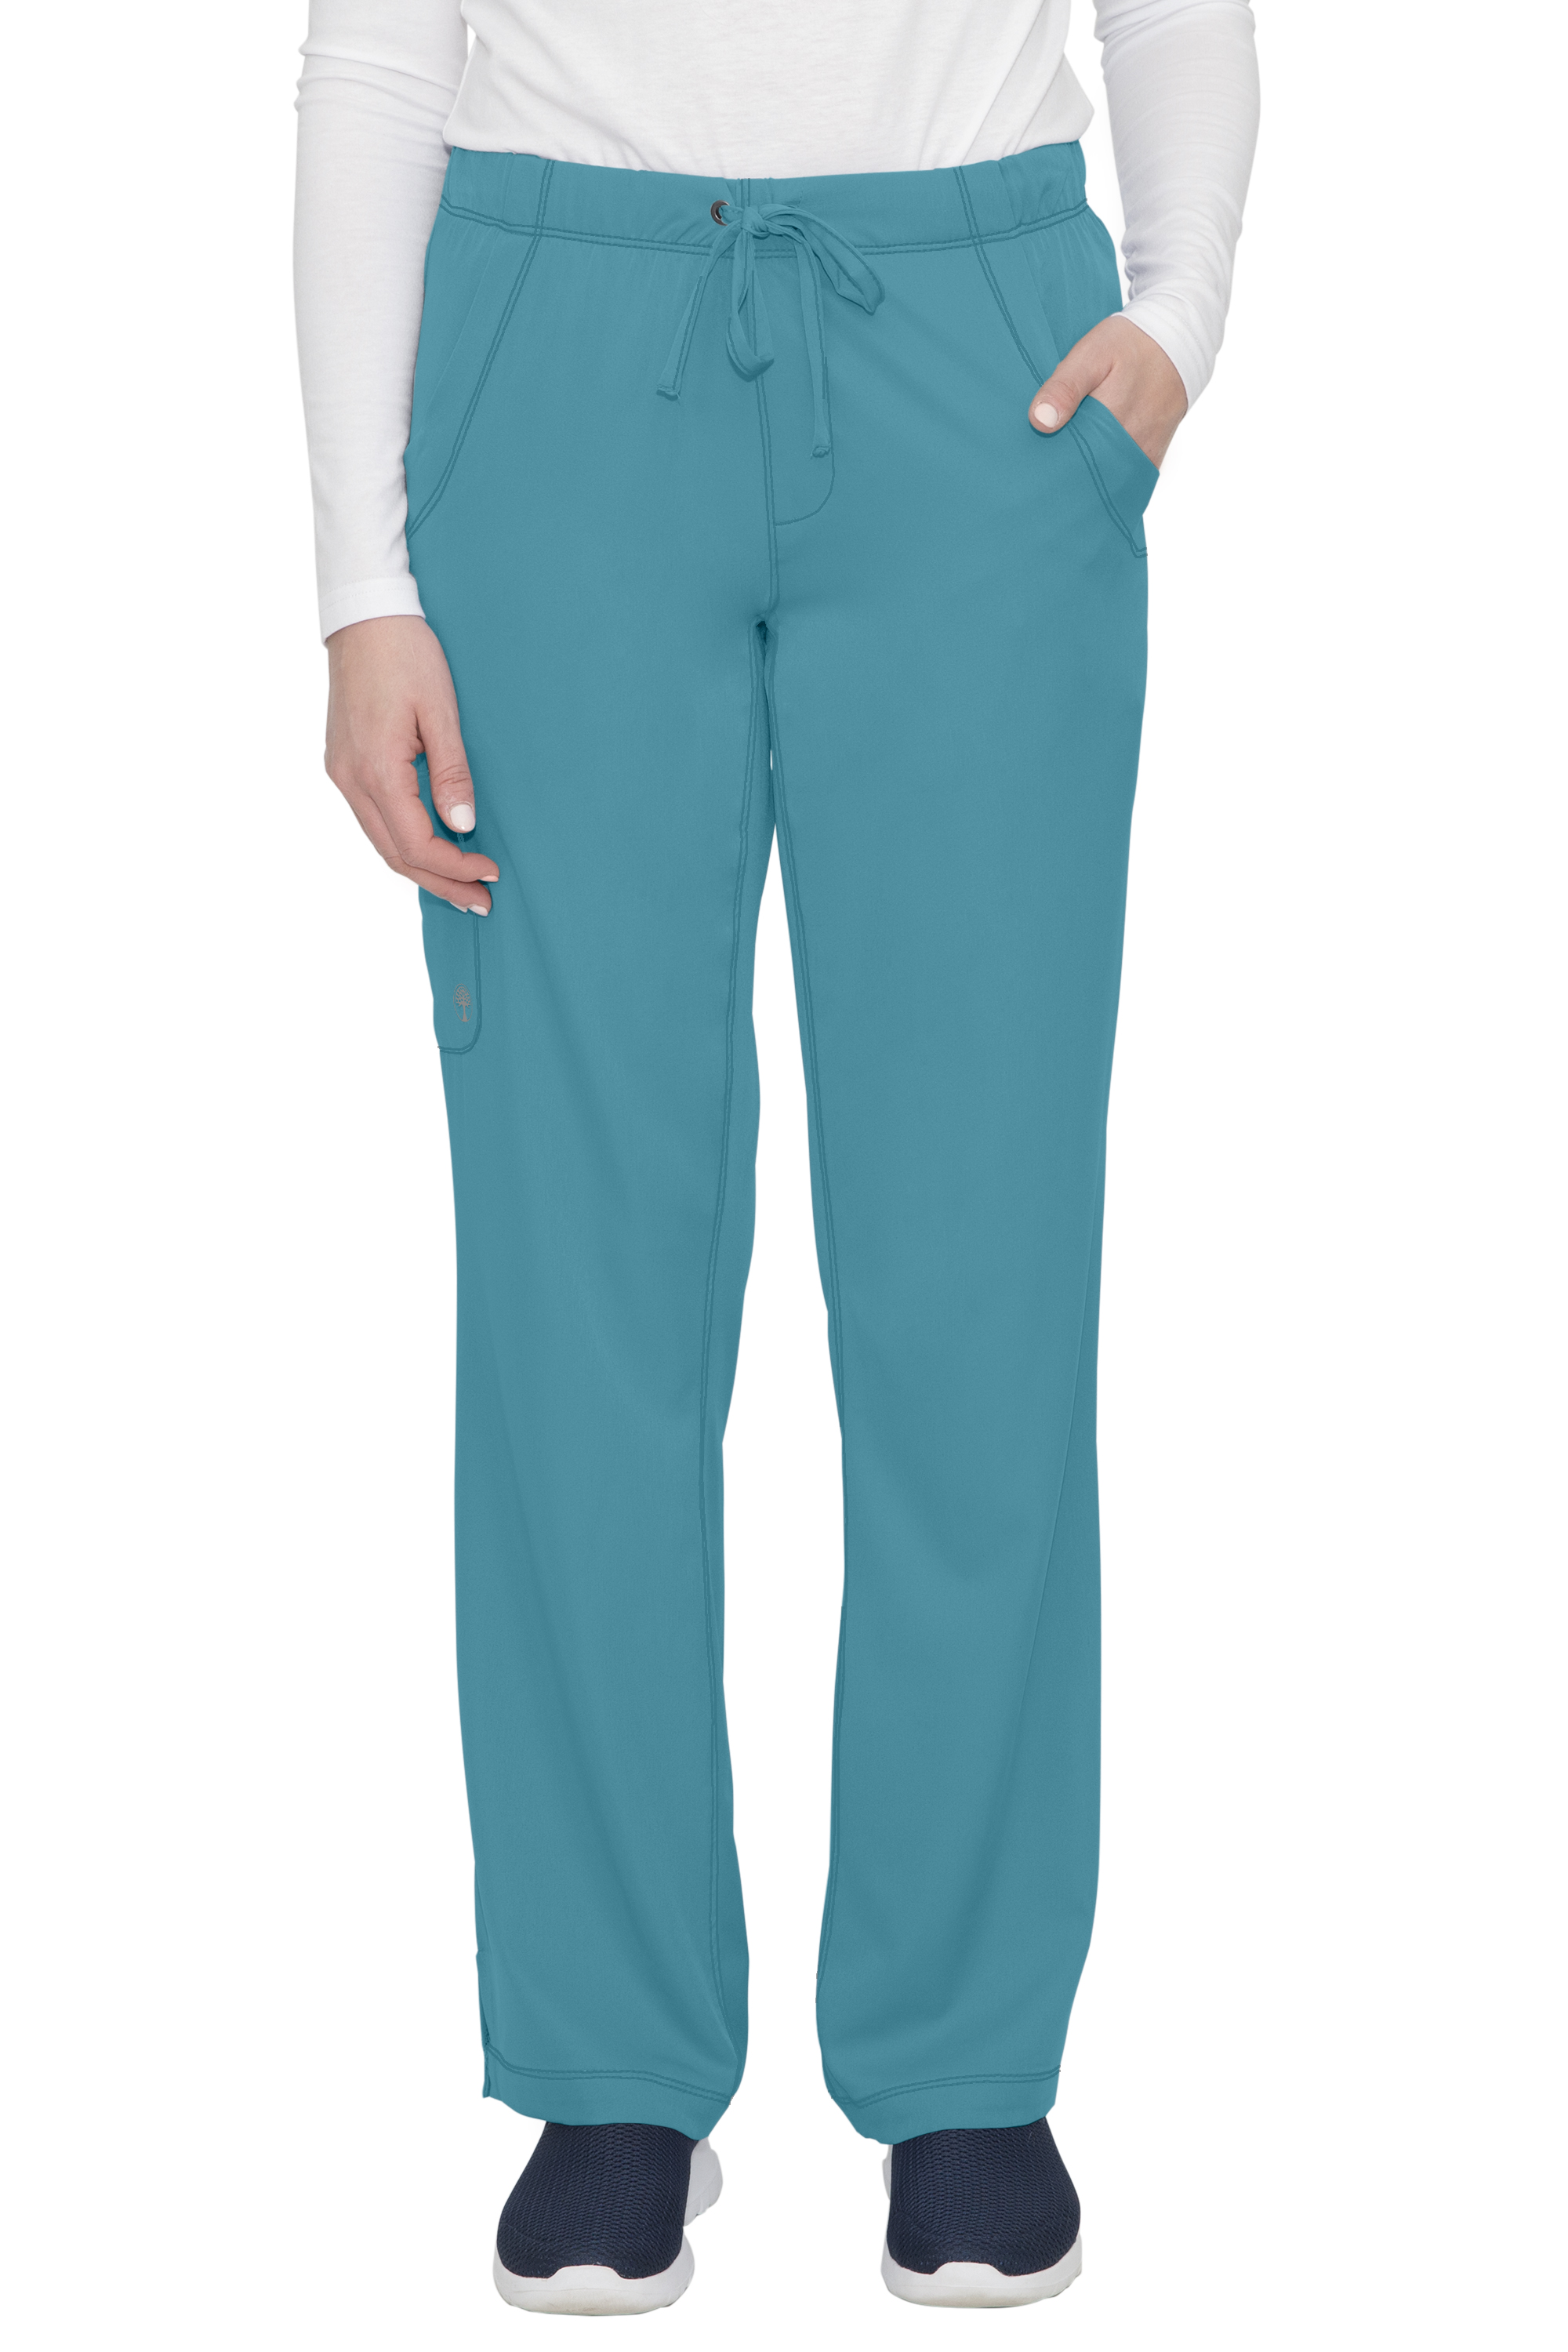 Buy MLH Pants - HH Works Online at Best price - PA